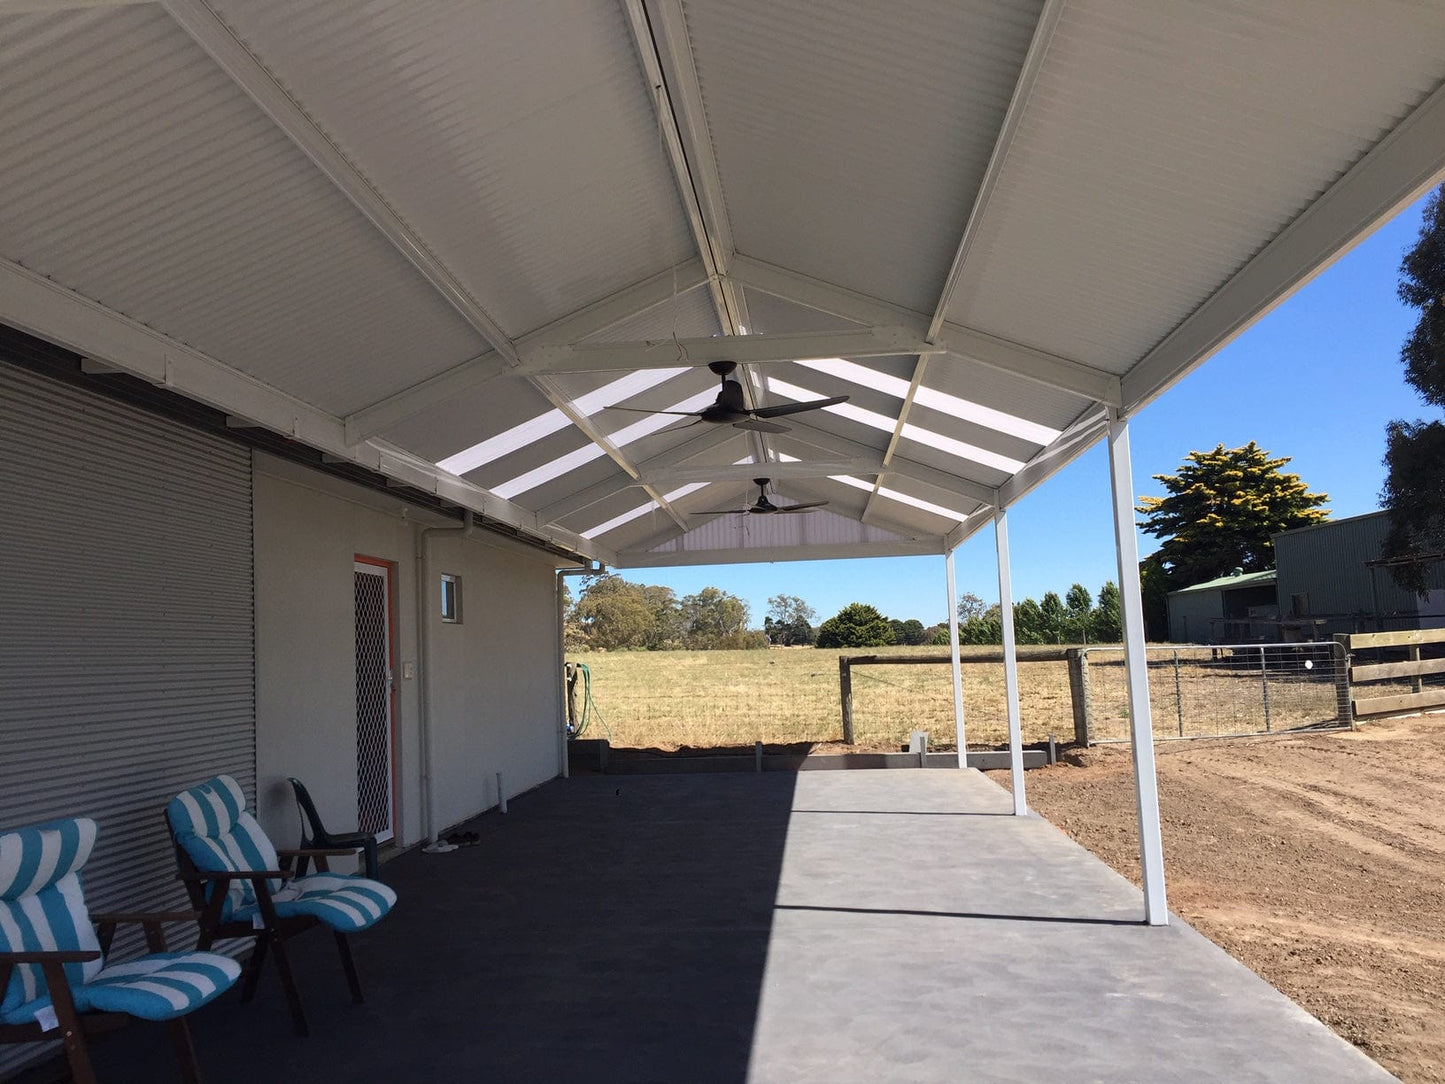 Insulated Gable Patio - 6m x 6m - Supply & Install QHI National